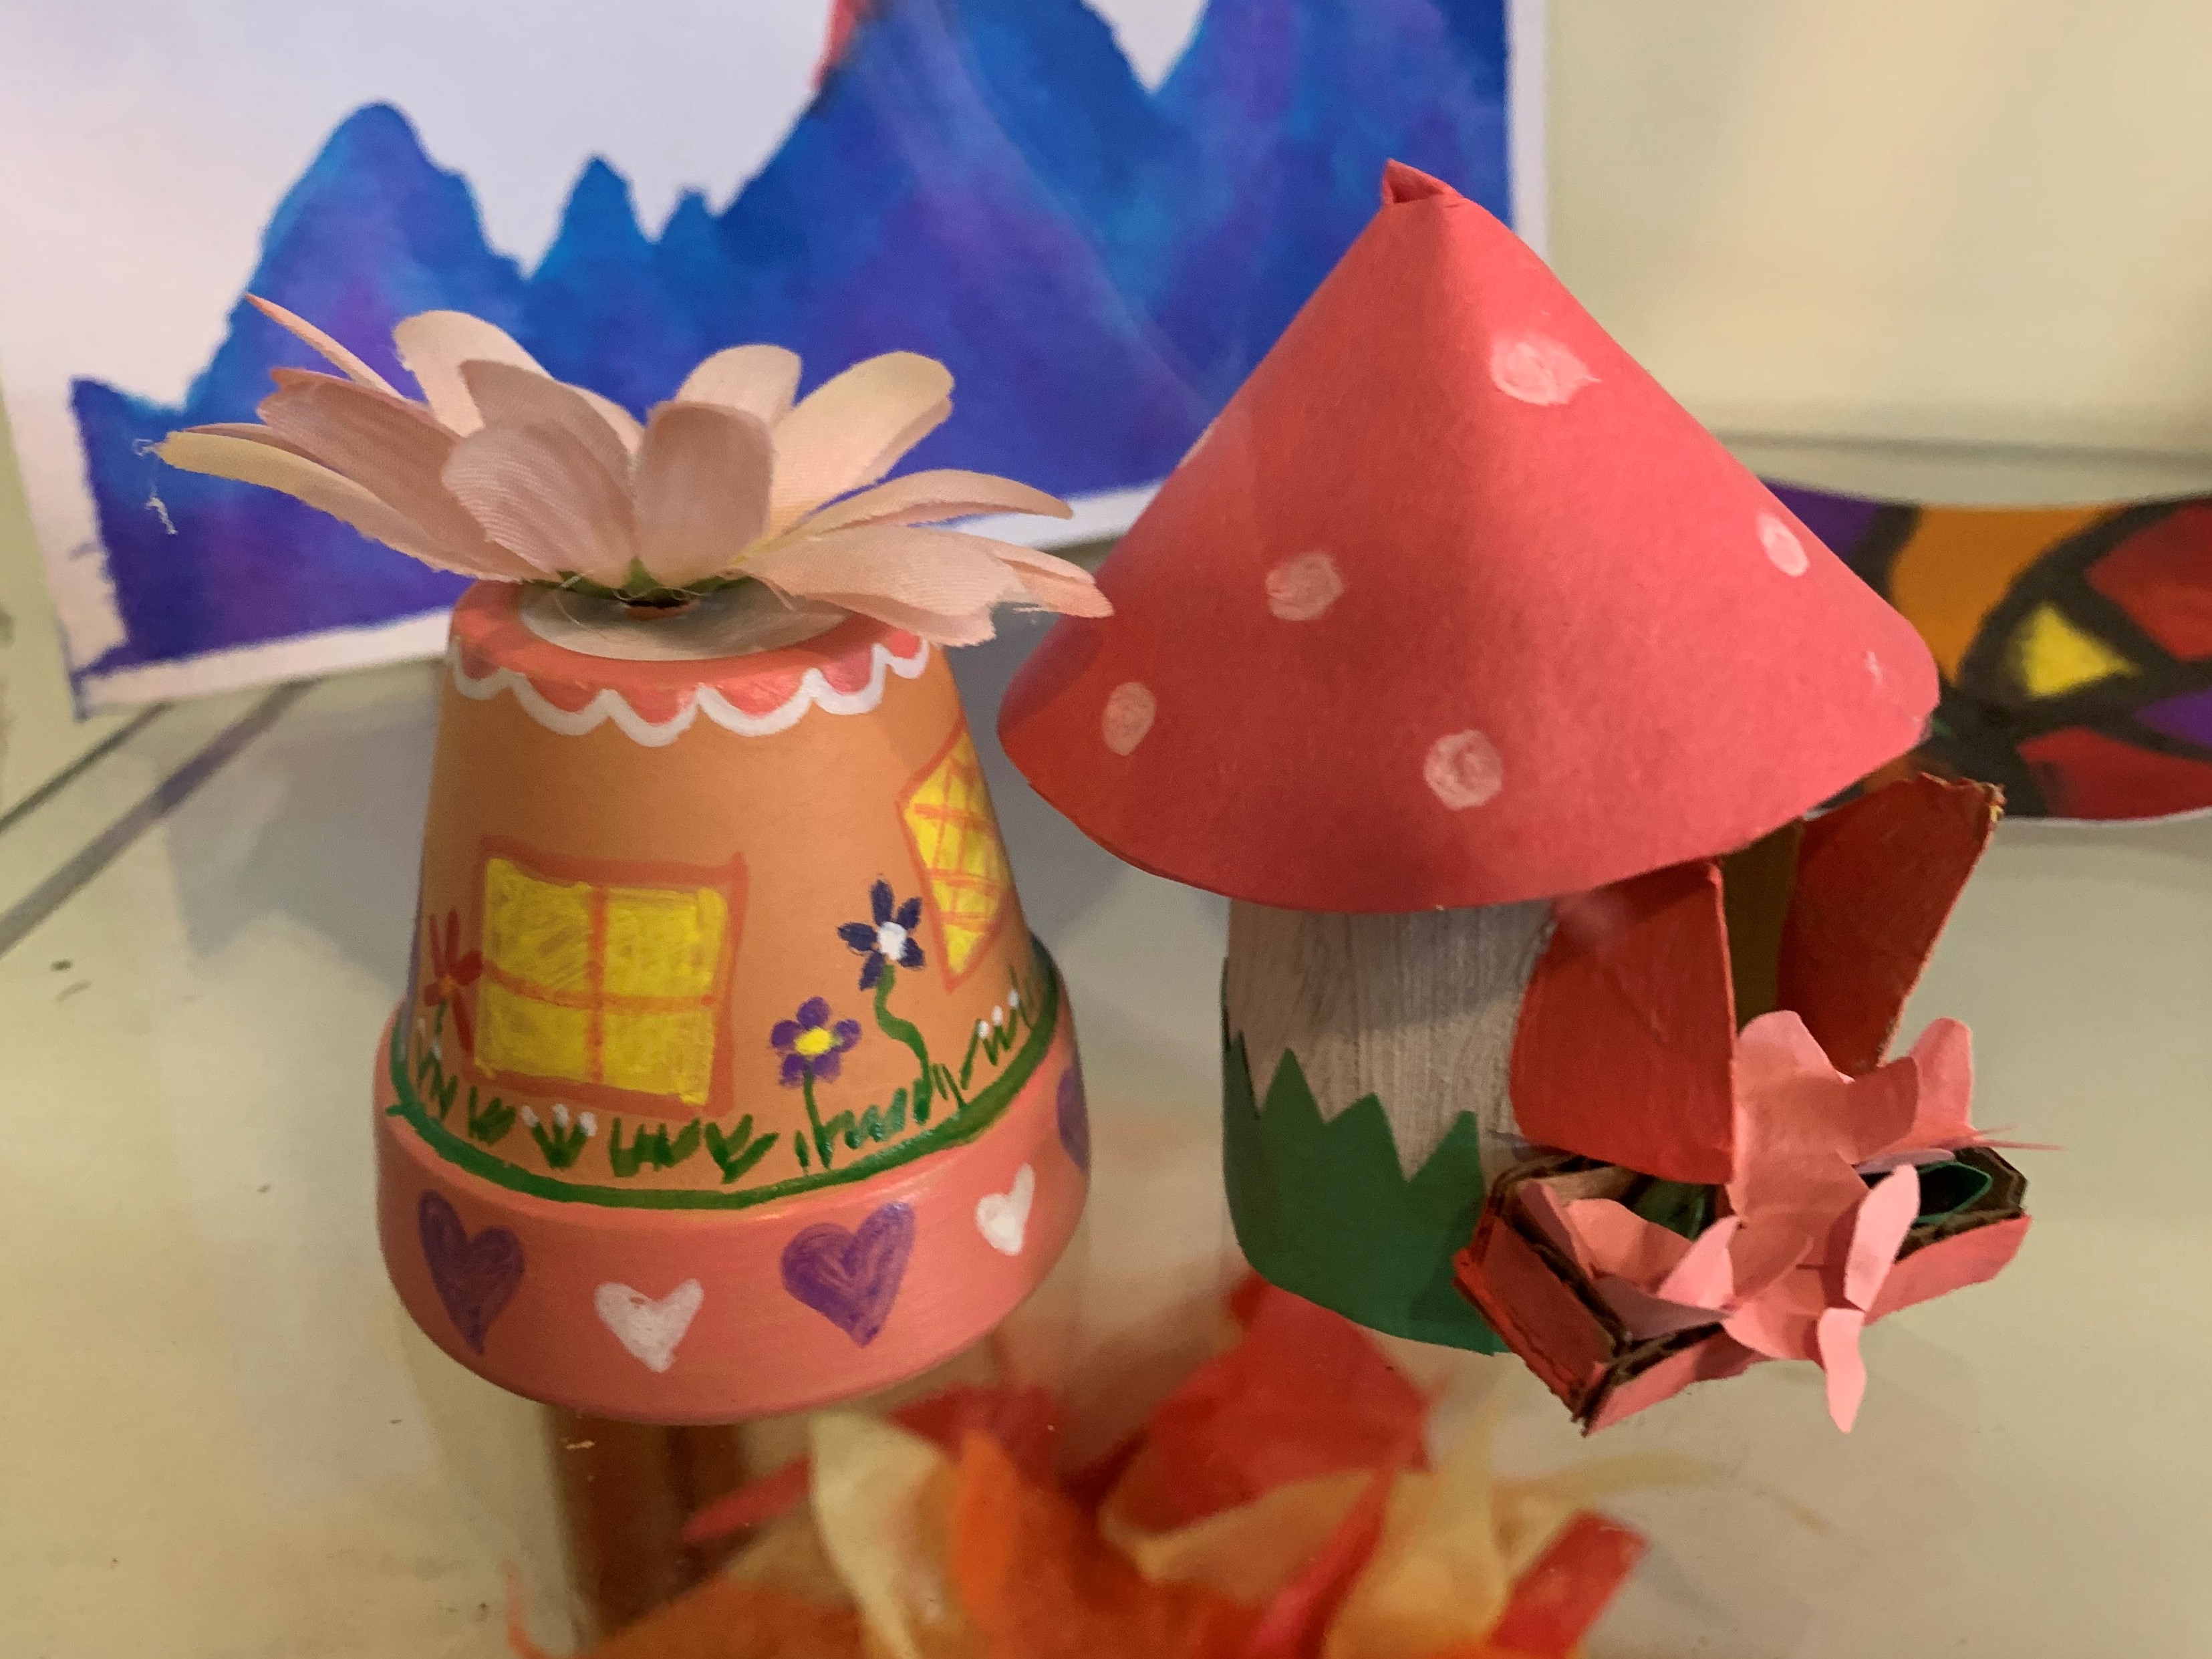 painted flowerpot that looks like house and mushroom house made out of paper